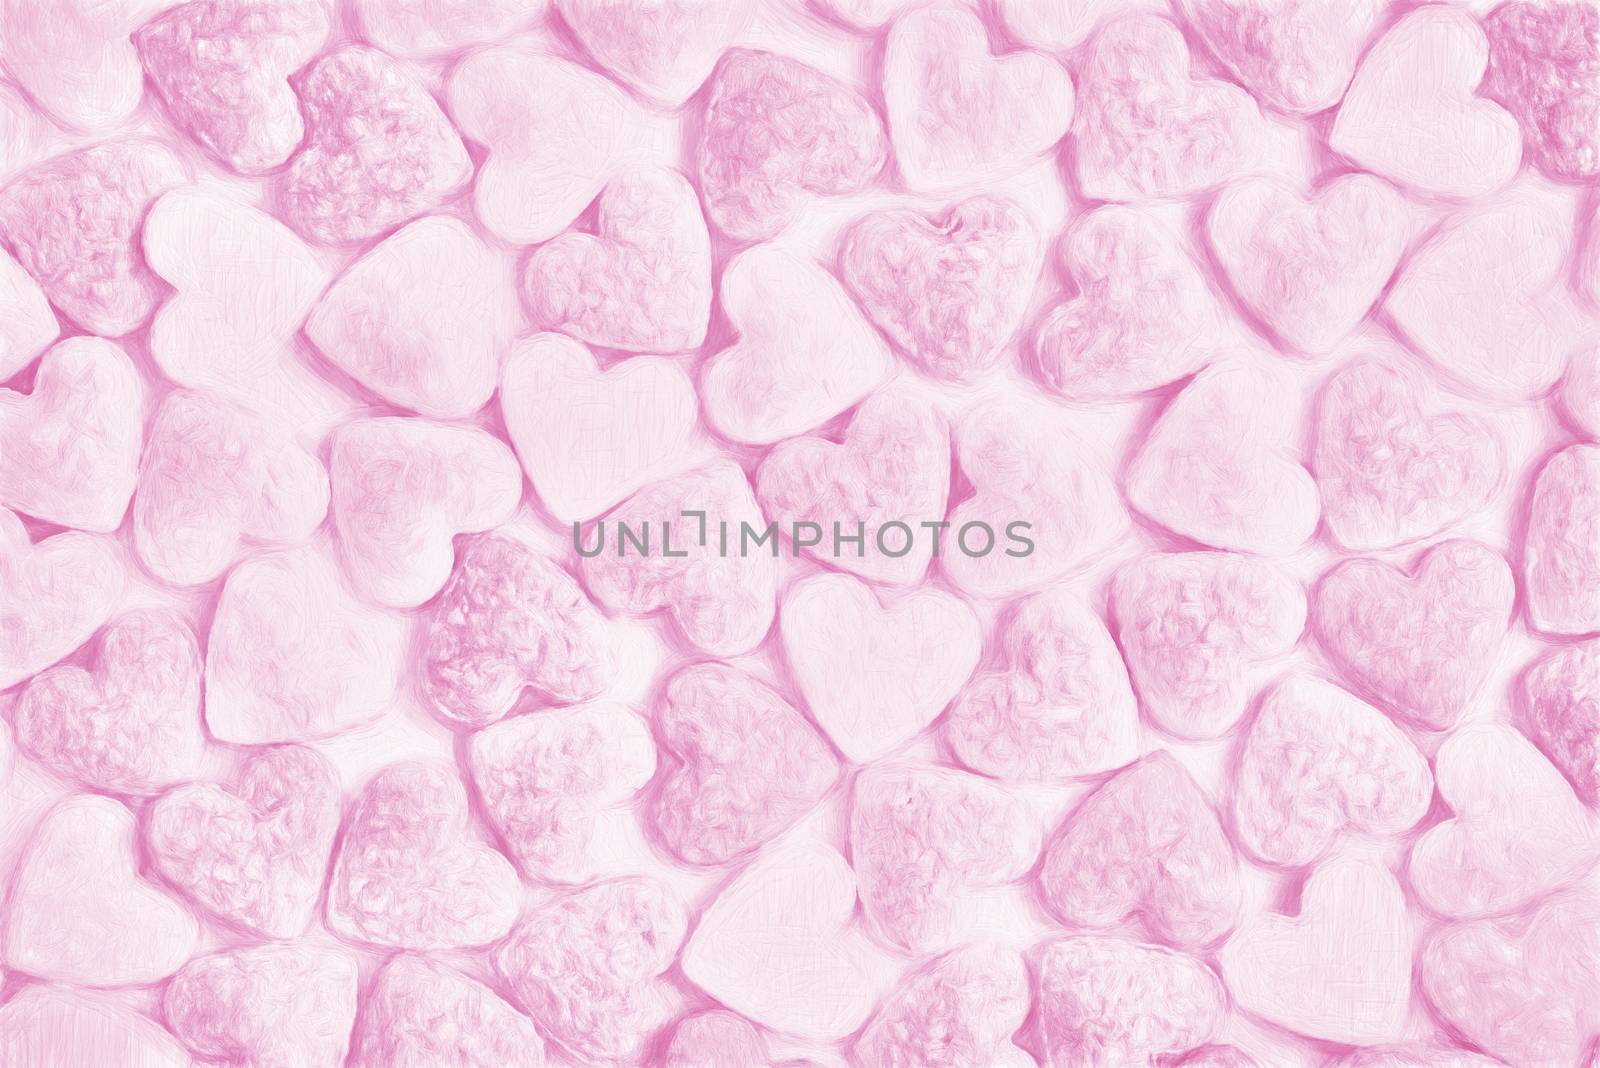 Valentines day background with heart. Valentines day pink texture